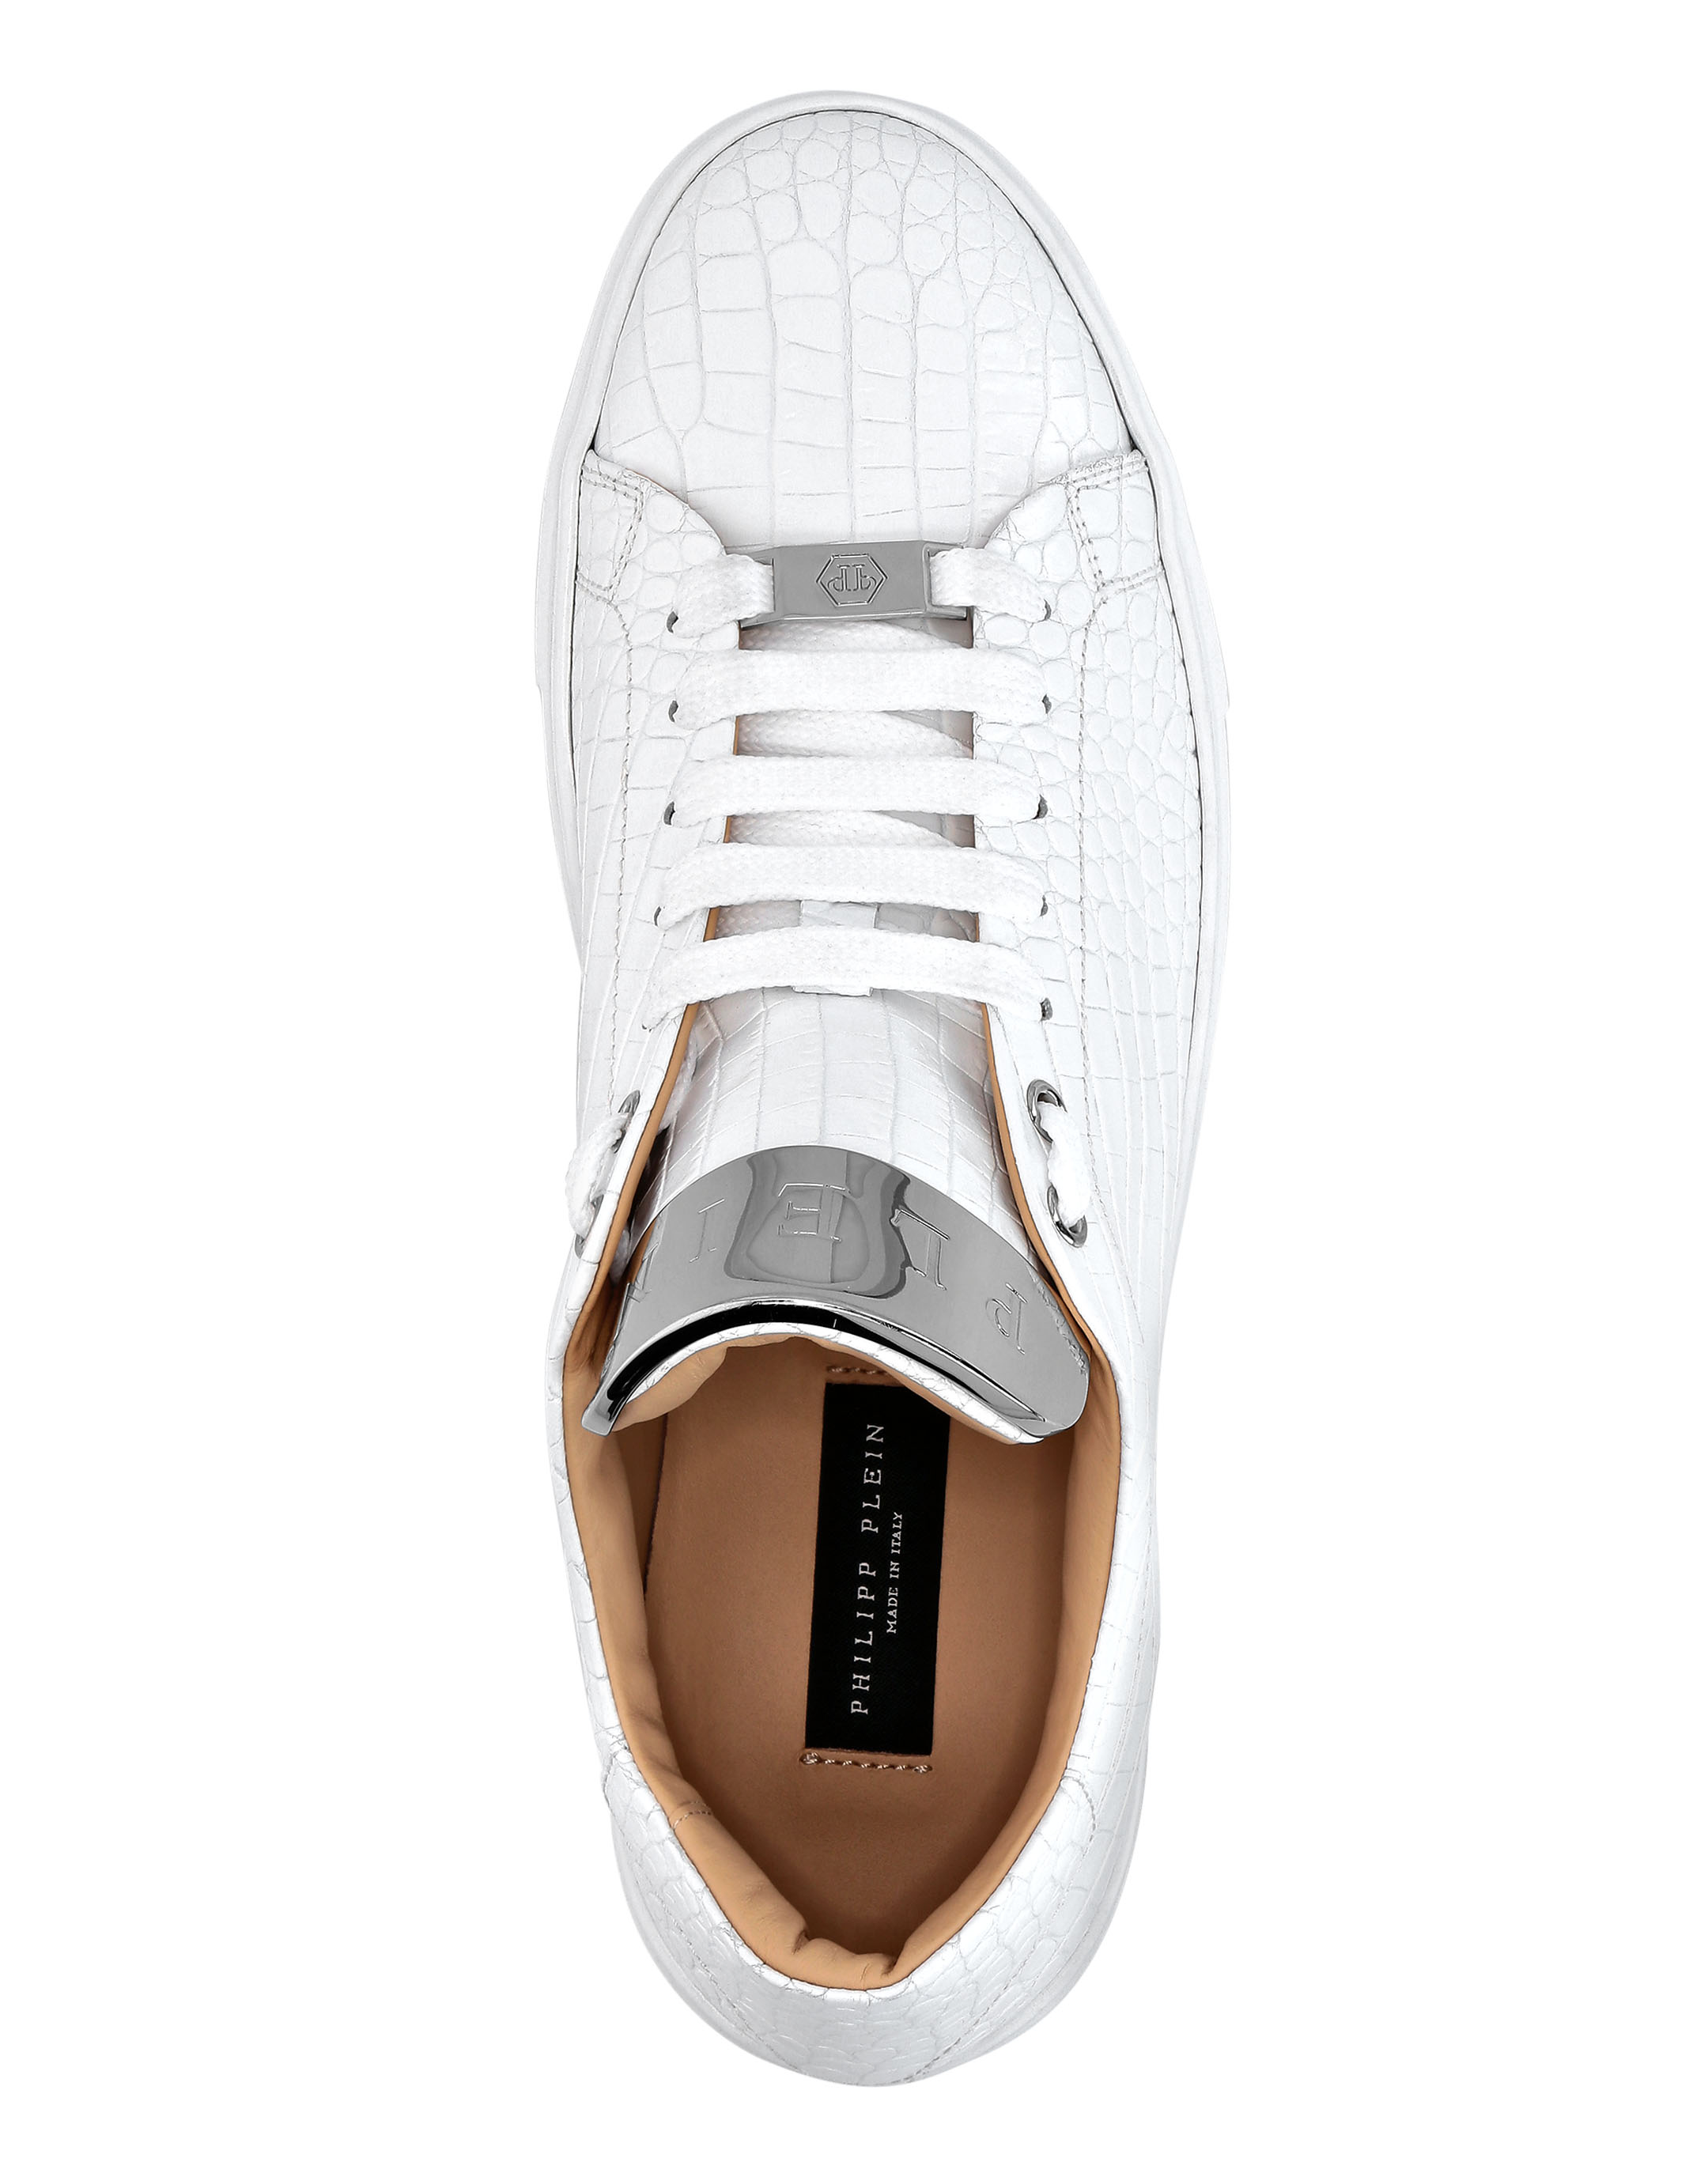 LO-TOP SNEAKERS SILVER $URFER COCCO PRINT | Philipp Plein Outlet